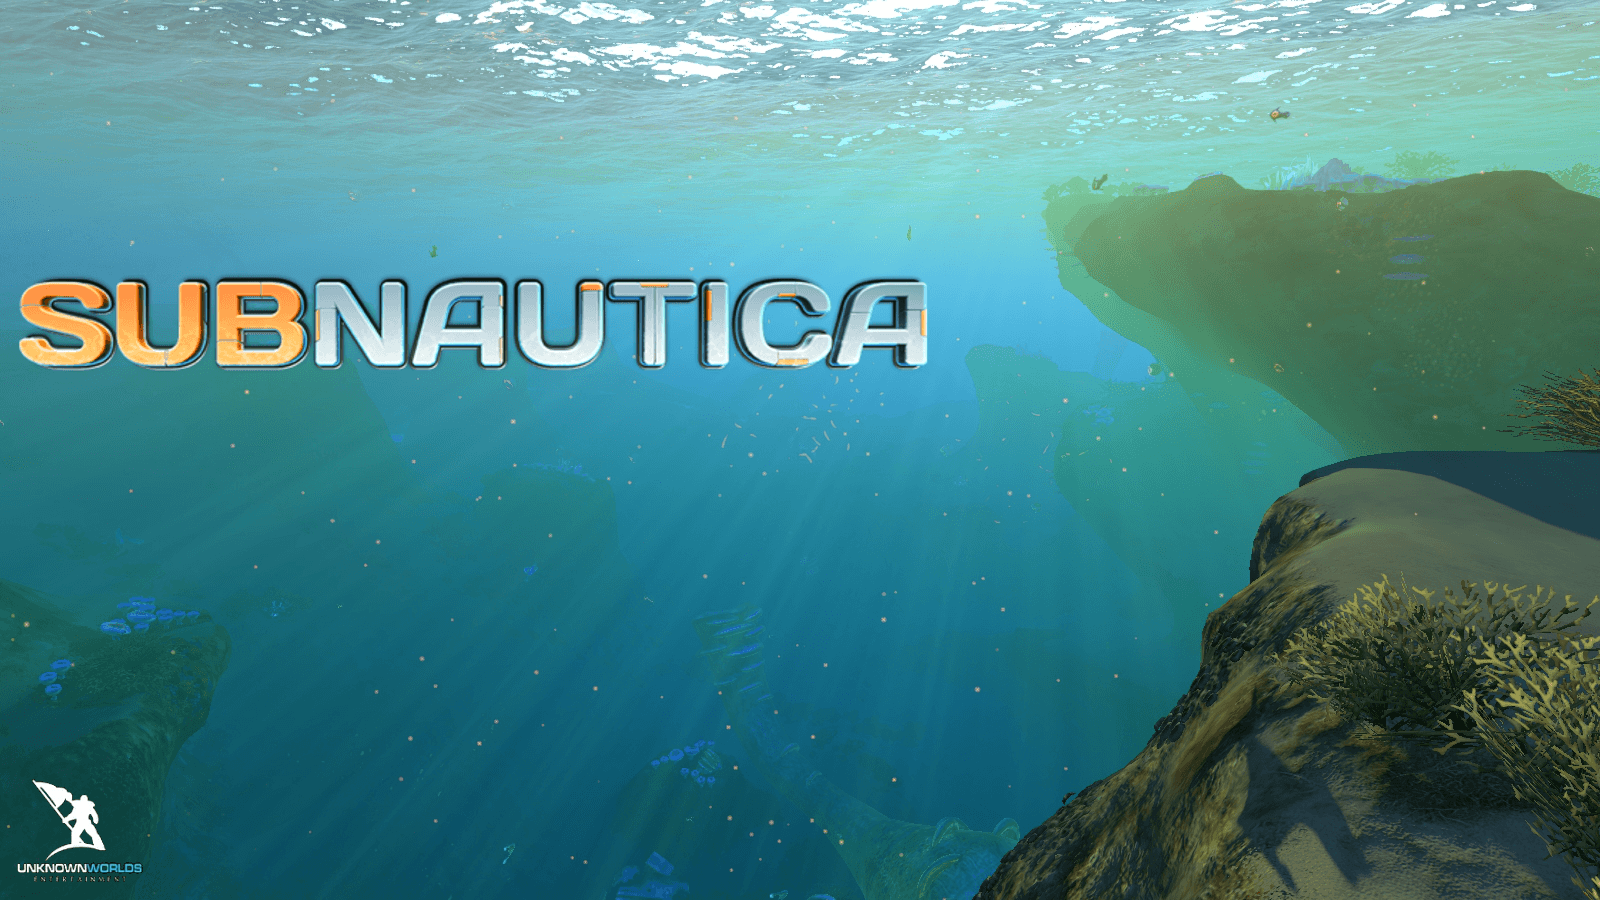 Made a wallpapers for my favorite game  subnautica